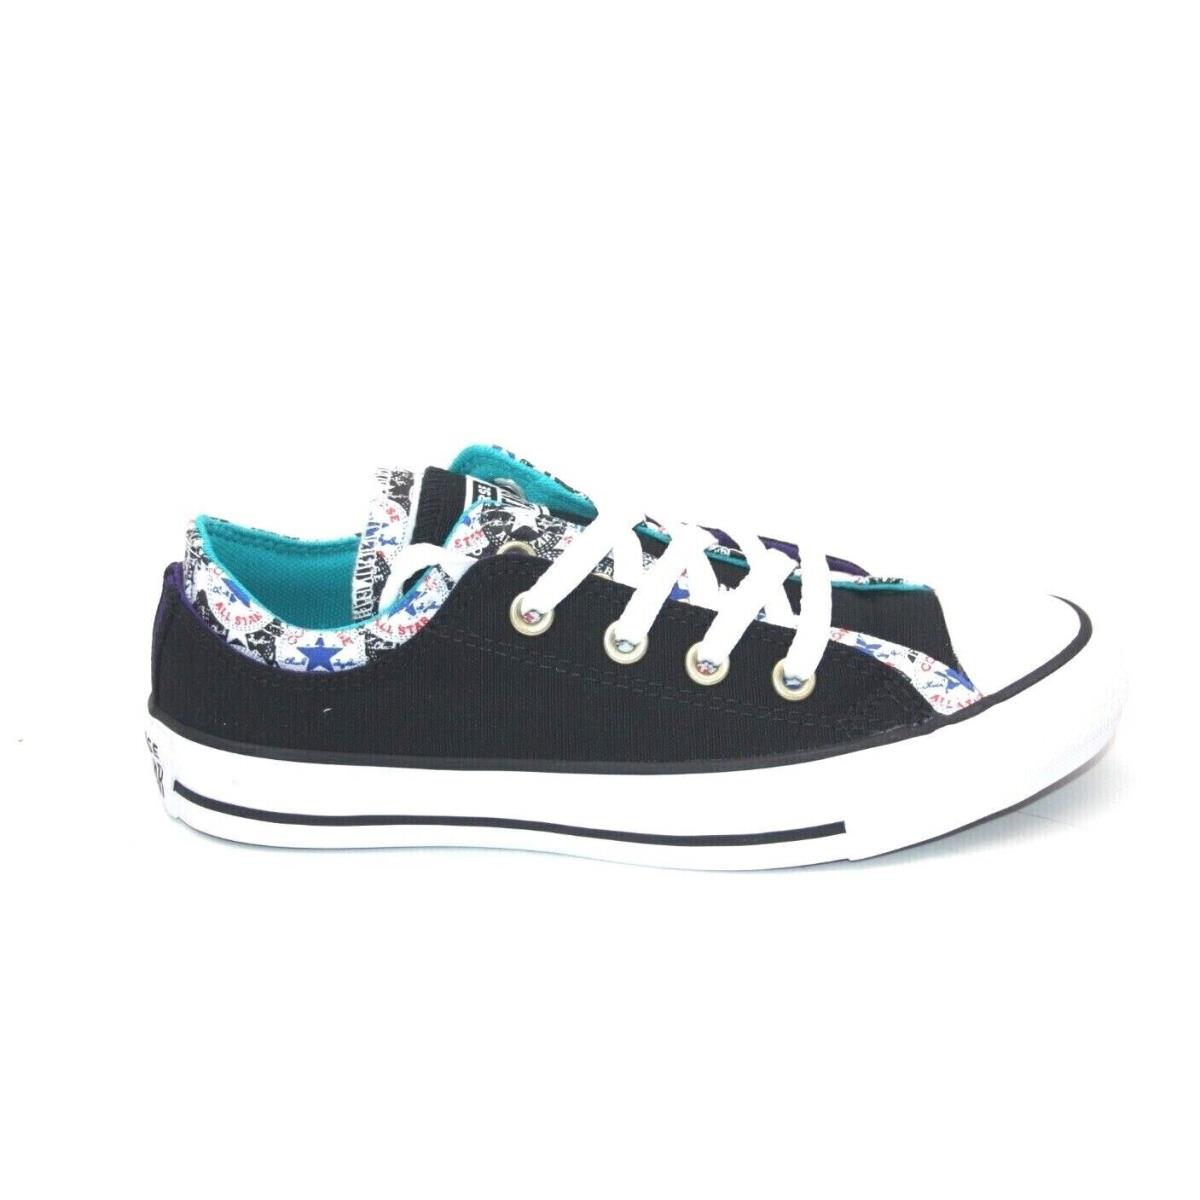 Converse Chuck Taylor All Star Double Upper 567042F Black/multi/rapid Teal Shoe